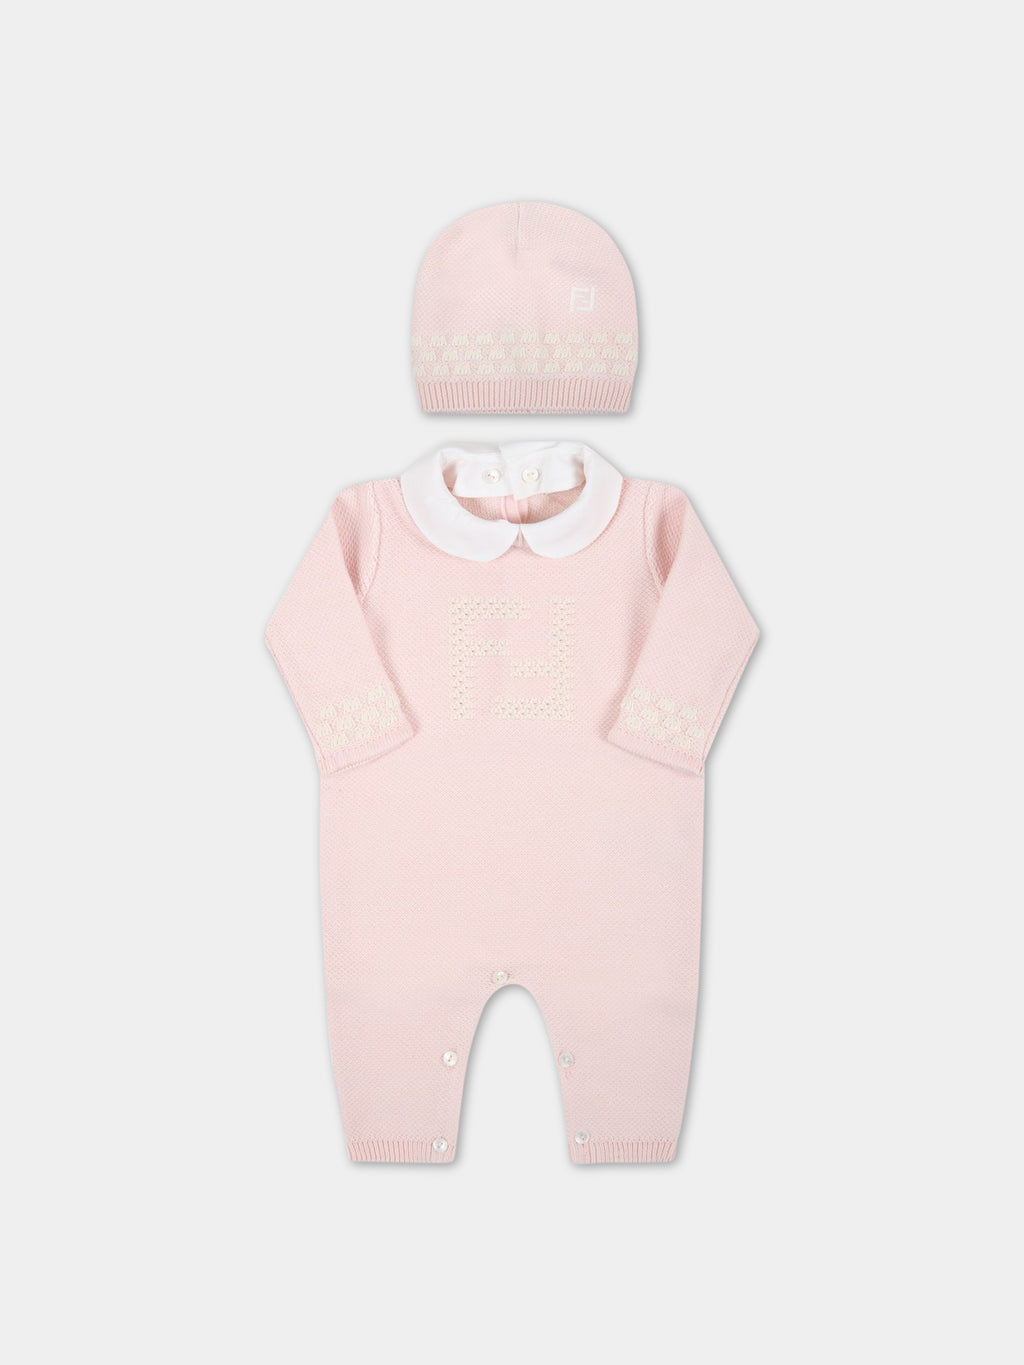 Pink set for baby girl with douple FF